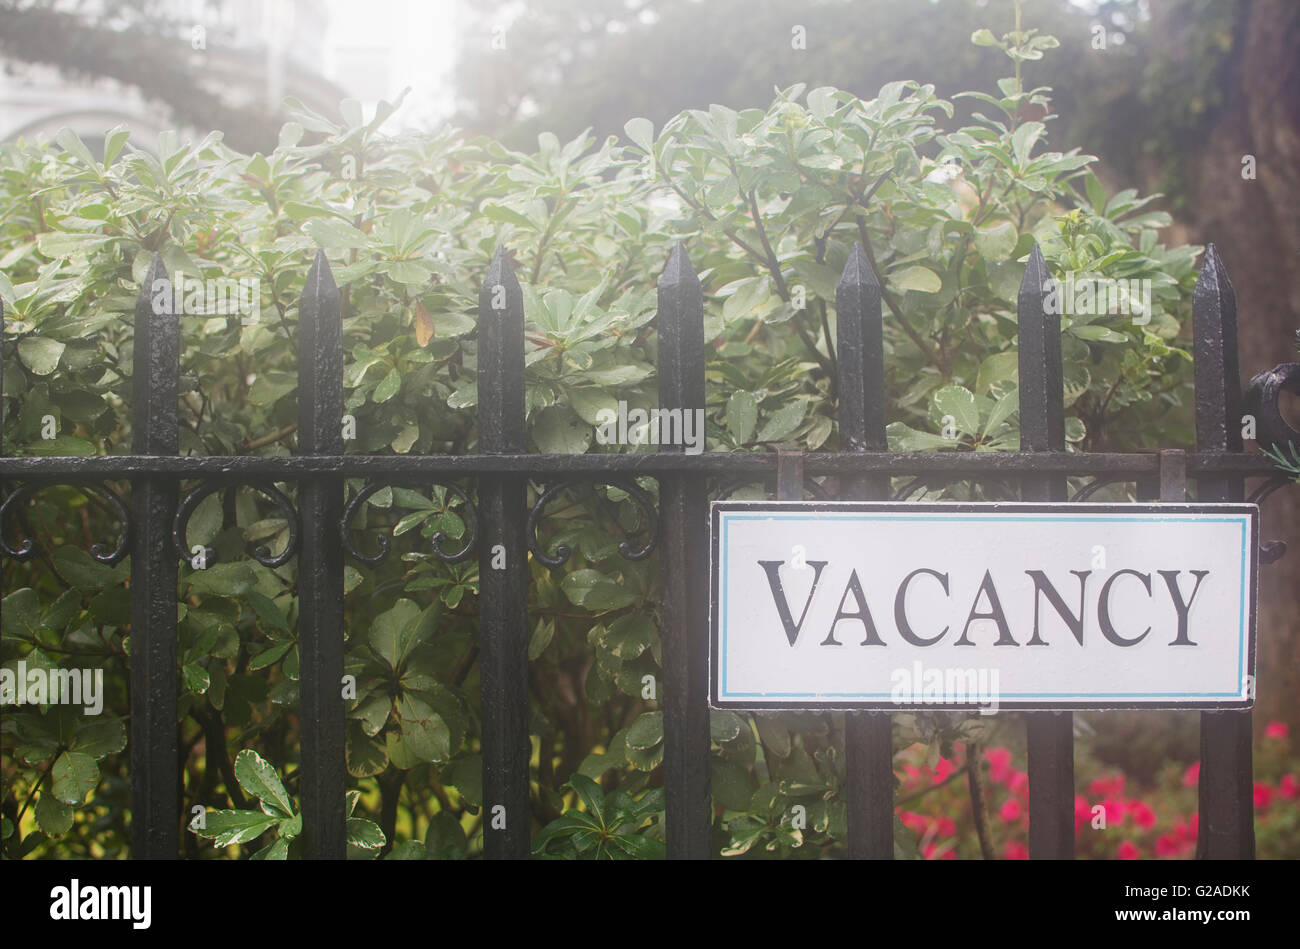 Vacancy sign on hotel's fence Stock Photo